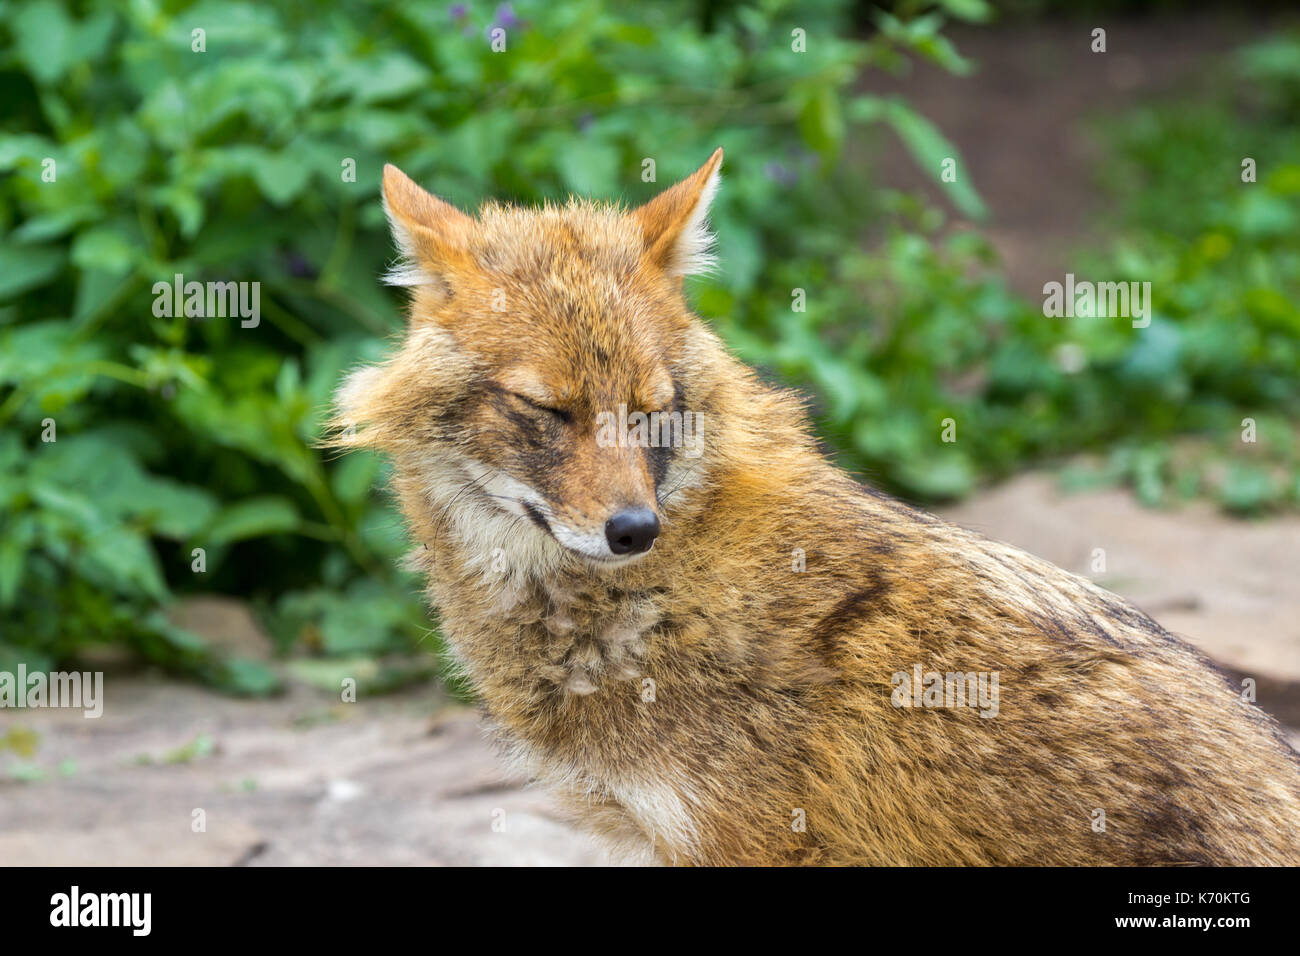 Golden jackal on a hot summer day wandered to the garden path in the suburbs Stock Photo